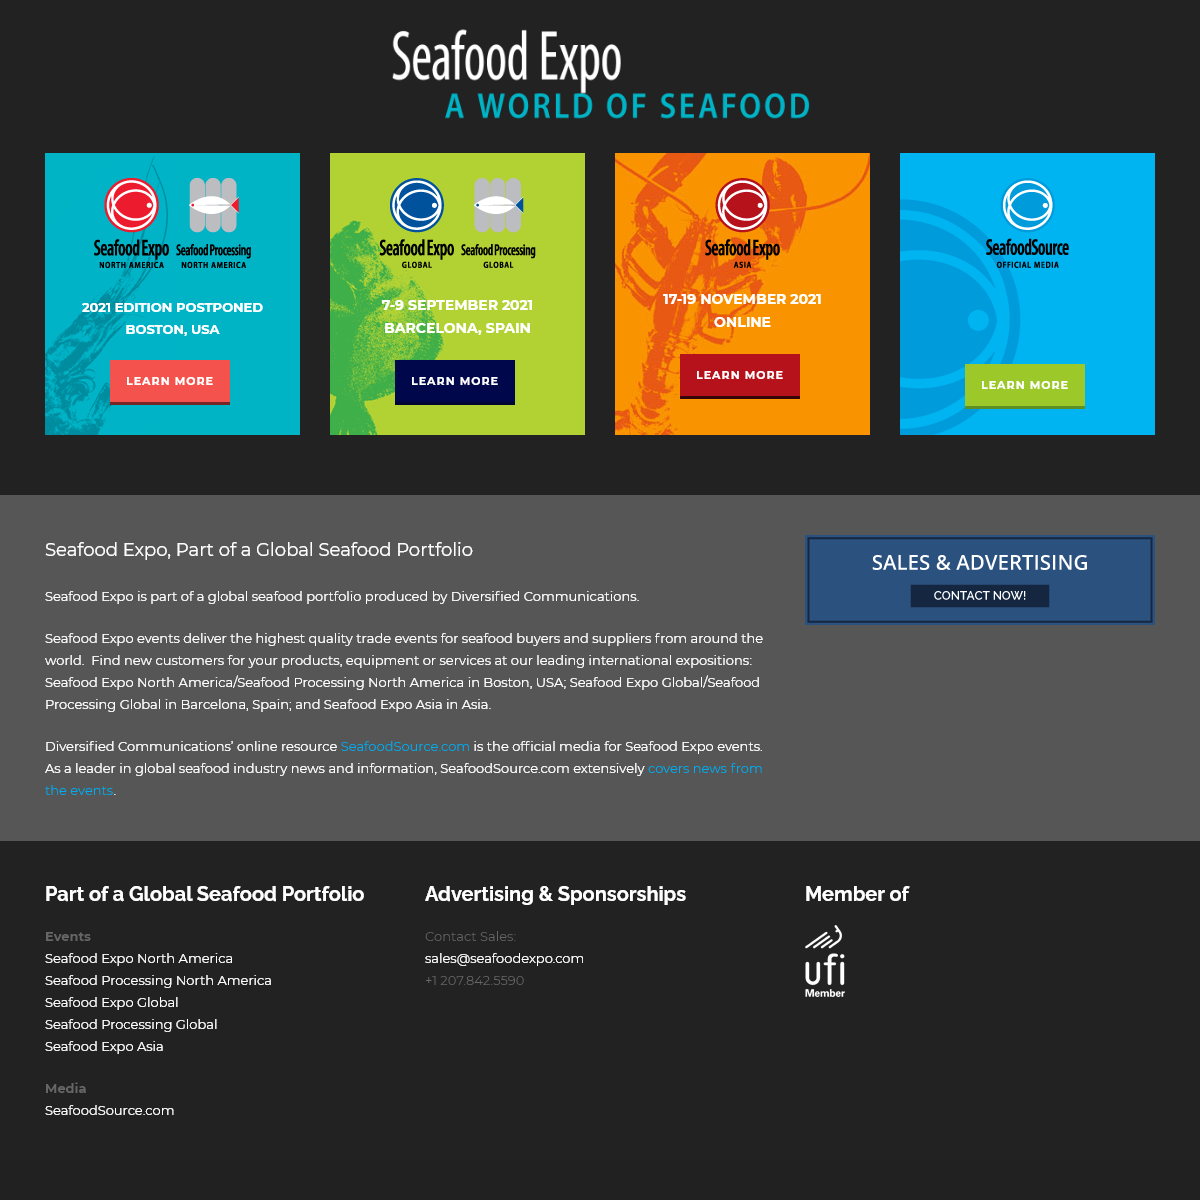 A complete backup of seafoodexpo.com